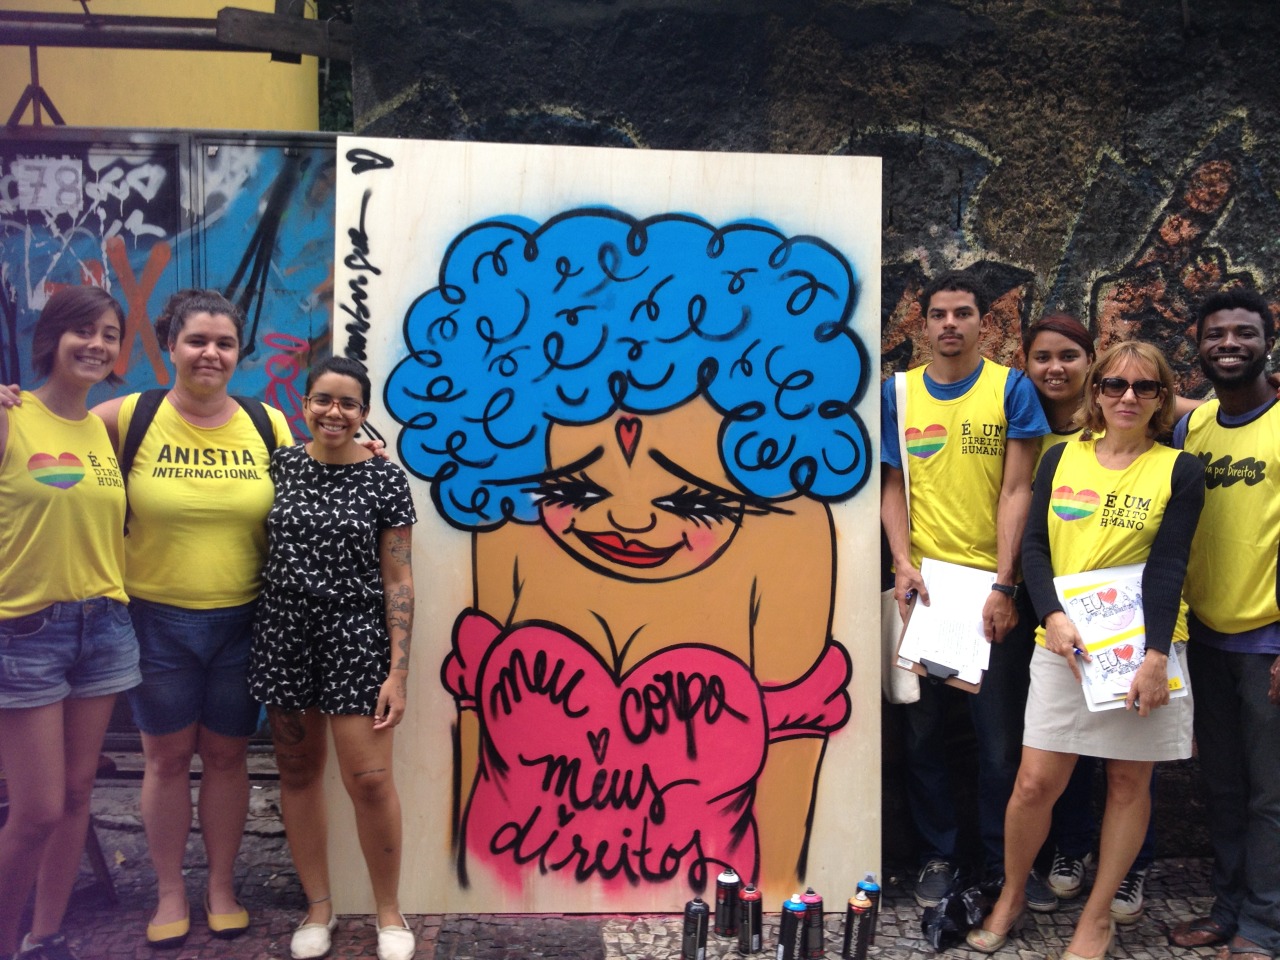 Graffiti artist Negahamburguer join the launch of #MBMR in an AI Brazil action during International Women&#8217;s Day at the traditional neighborhood of Lapa - Rio de Janeiro. Activists collected signs for petition and distributed tatoos.